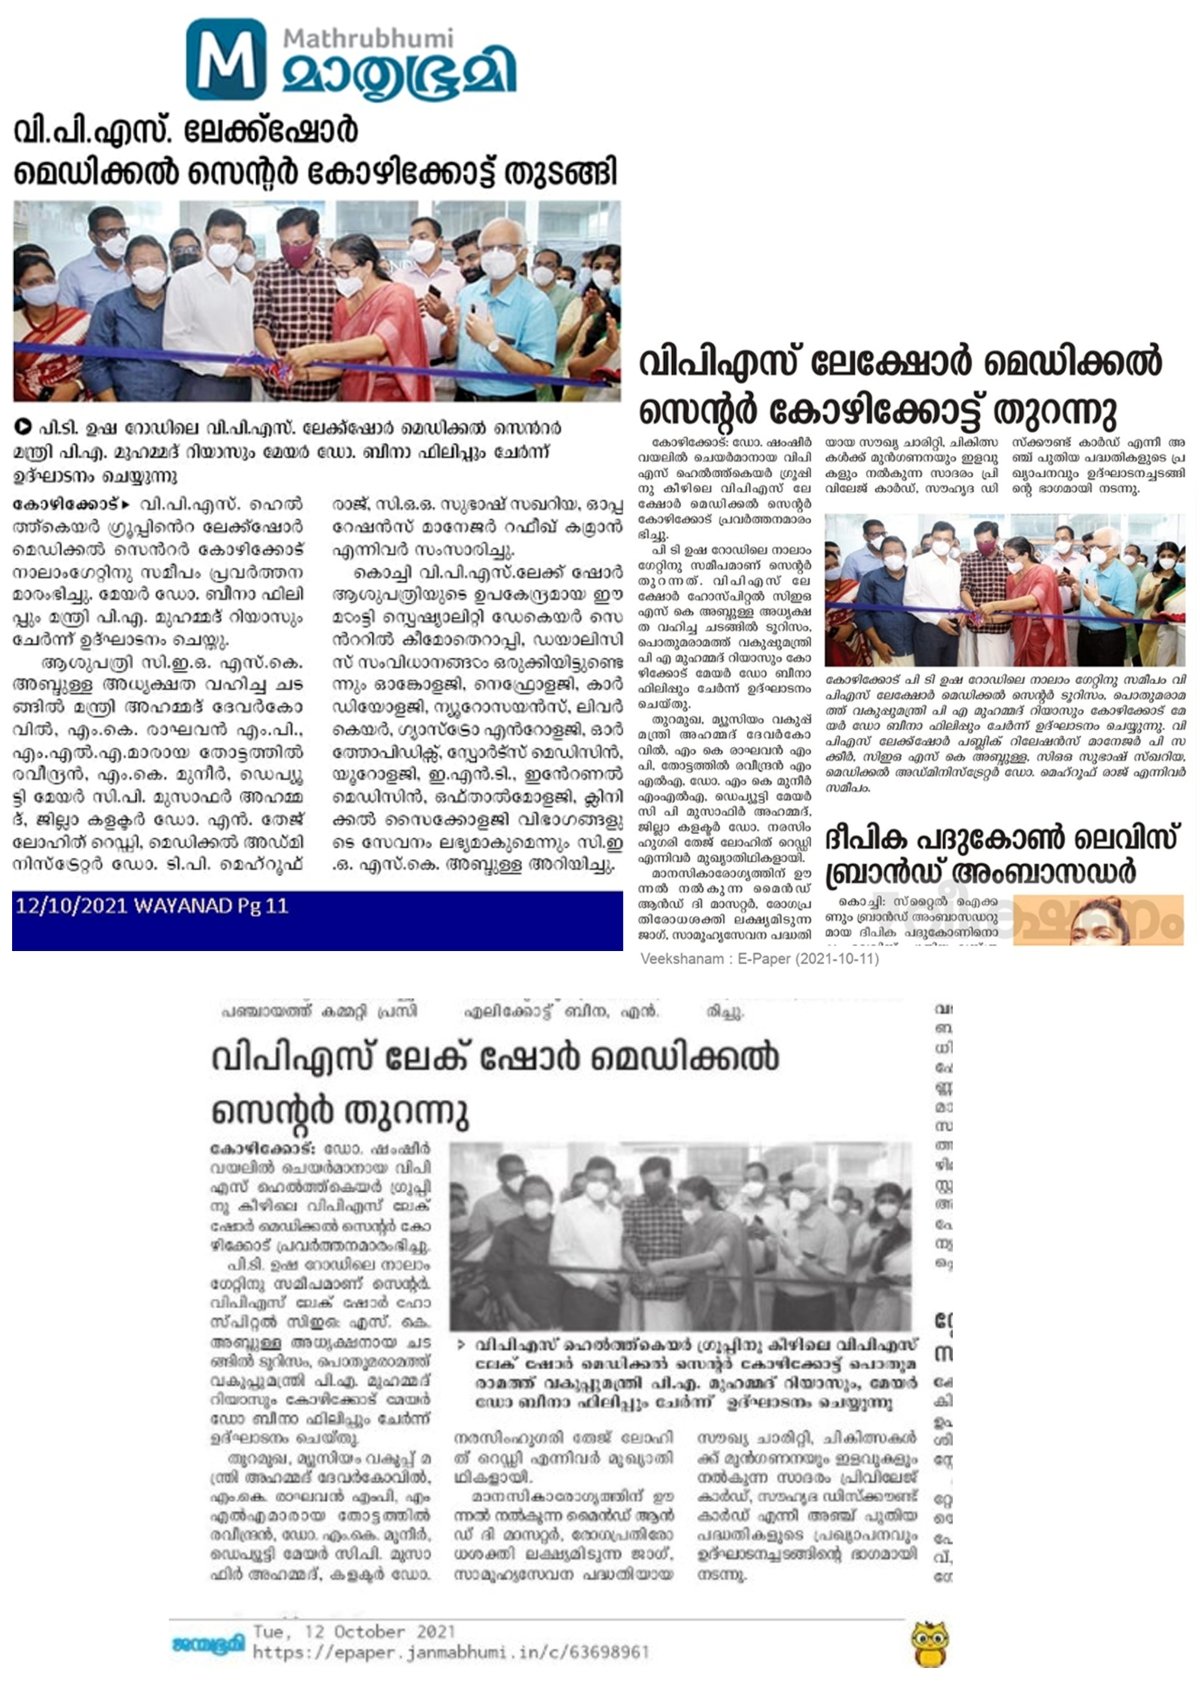 VPS Lakeshore Medical Centre Launched at Calicut